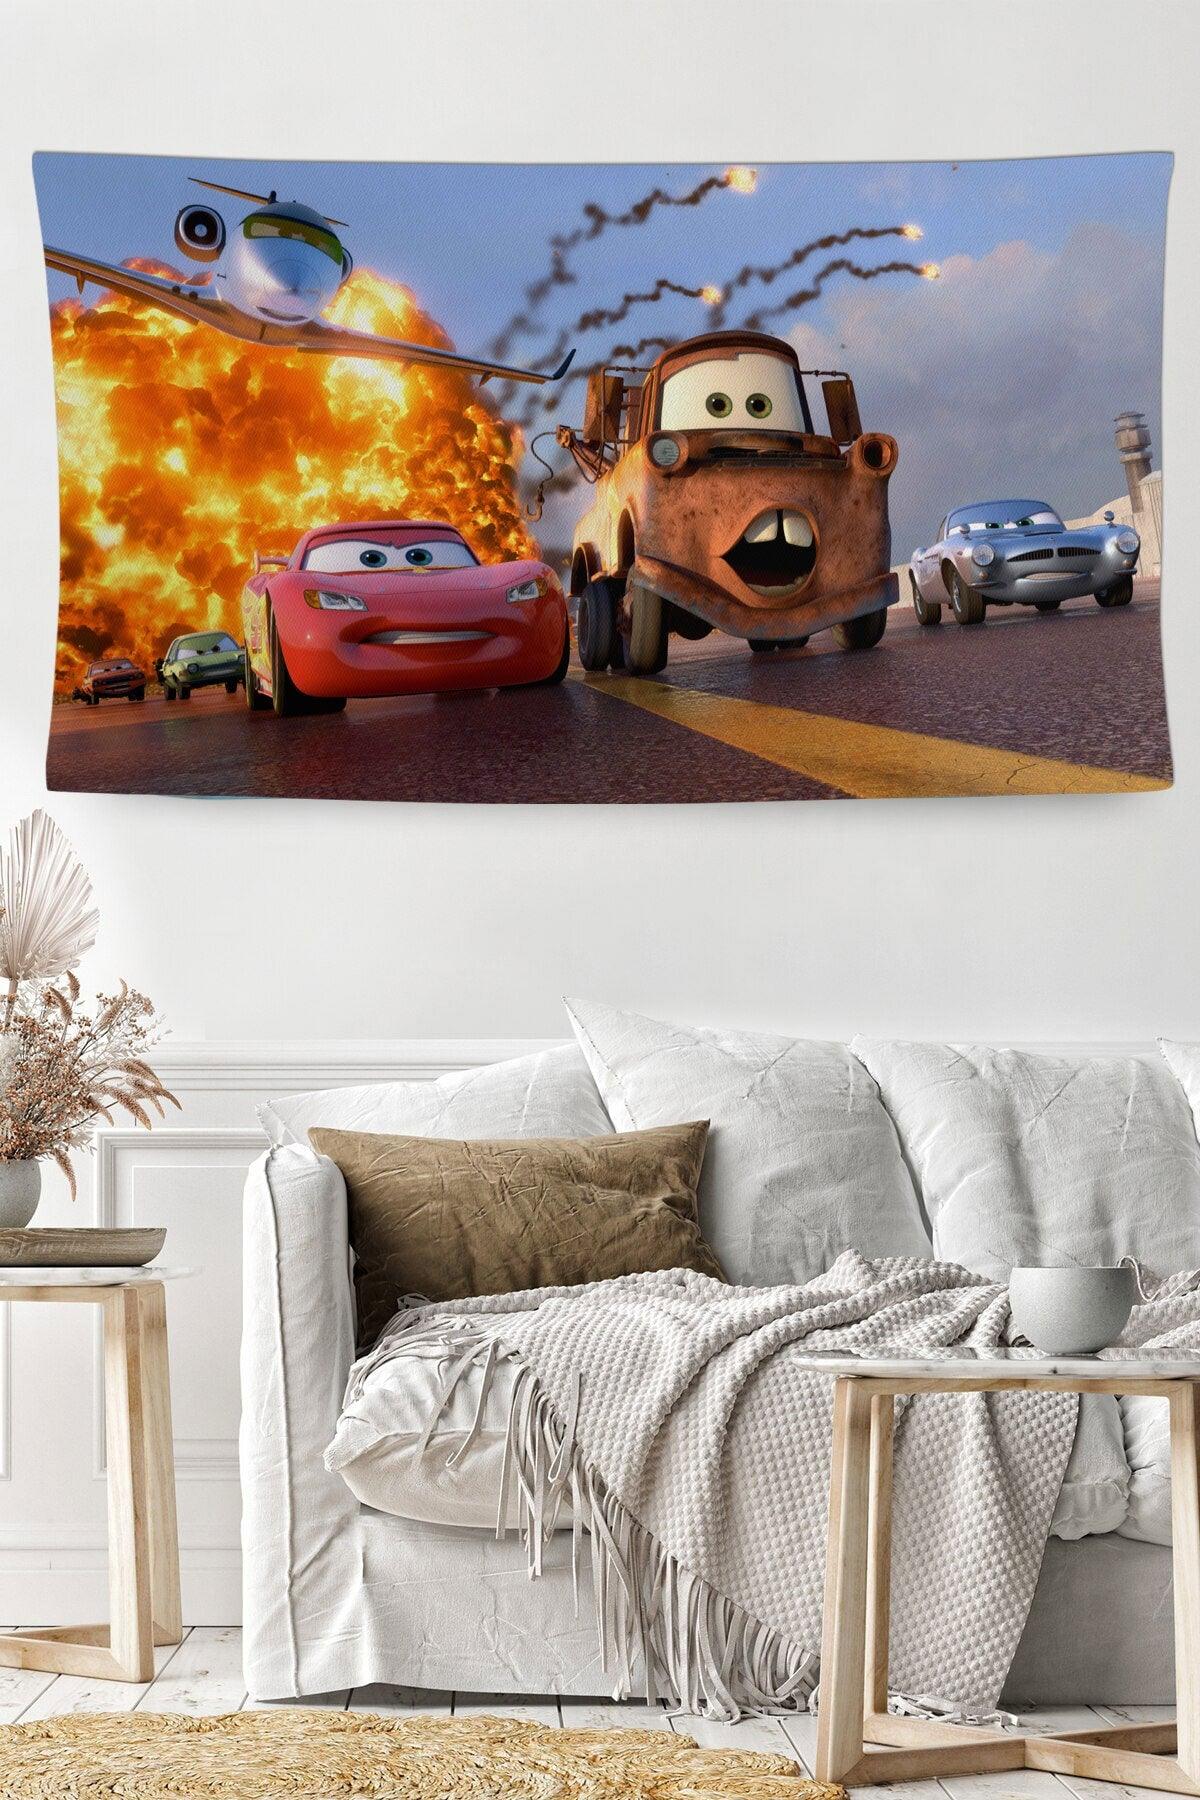 Lightning Mcqueen Themed Wall Covering Carpet Washable Does Not Fade Stain Resistant Decorative - Swordslife